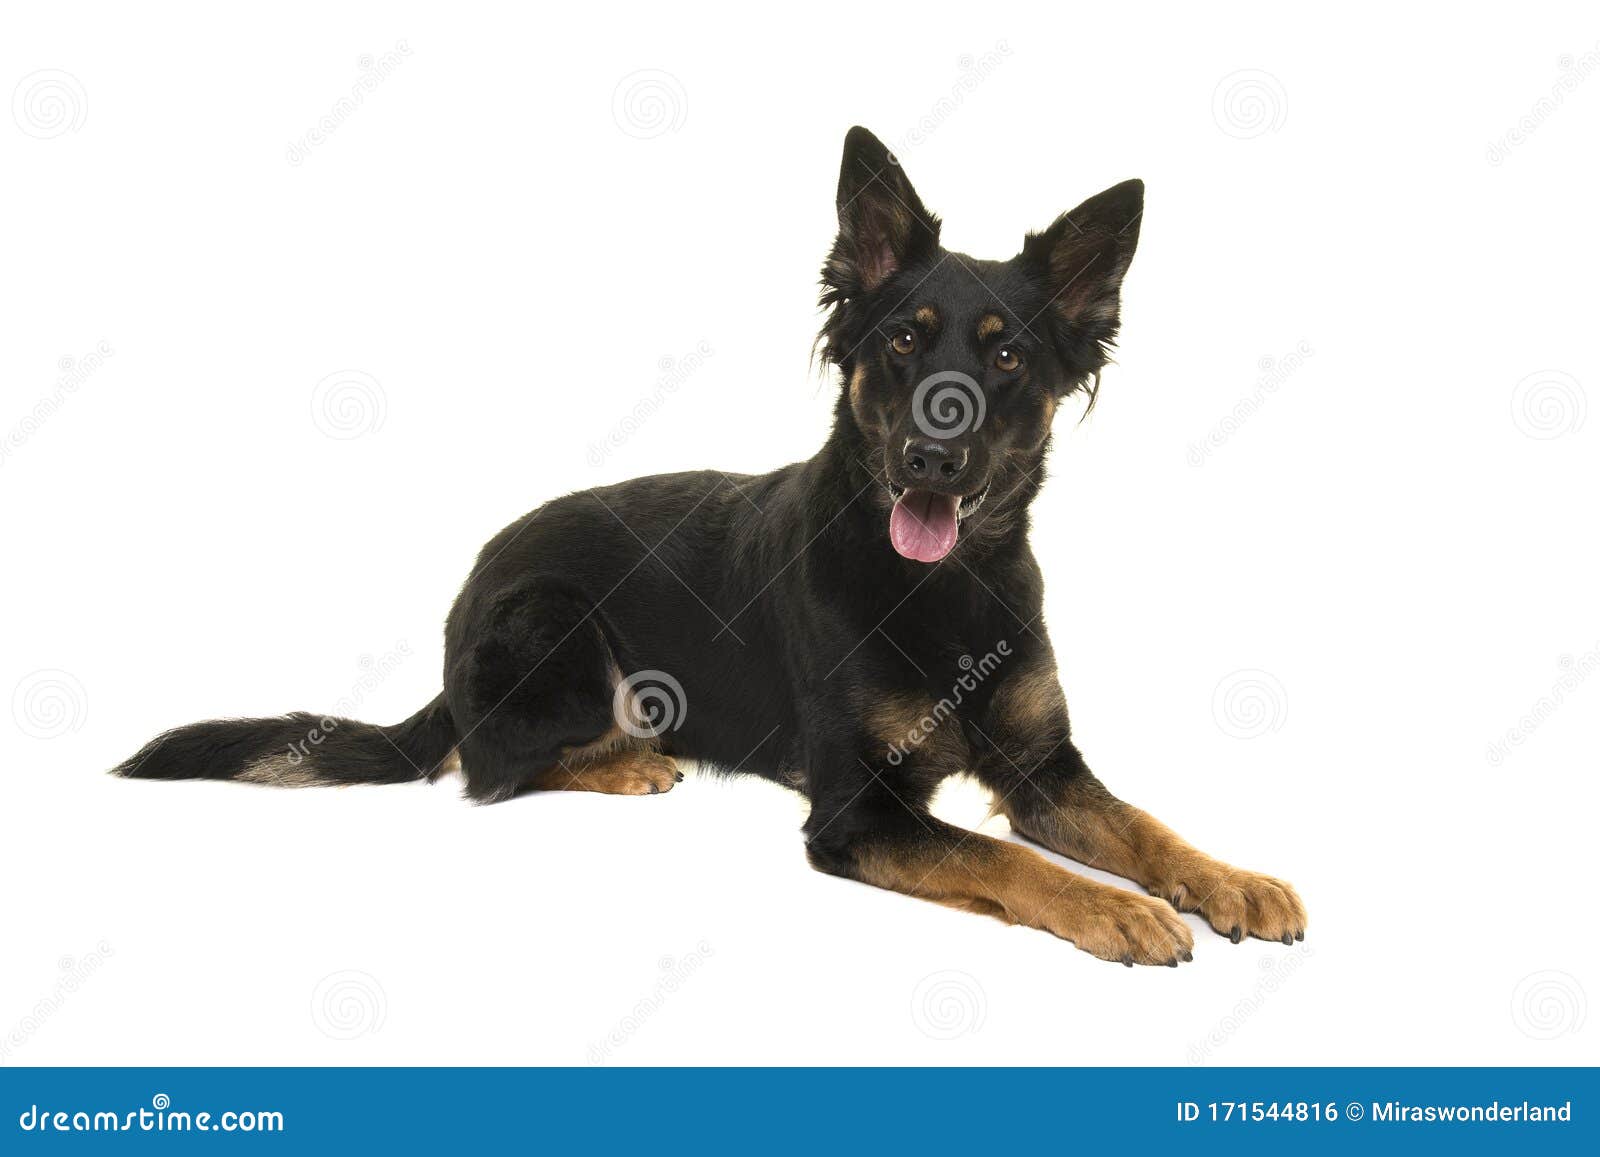 Bohemian Shepherd Lying Down Looking At The Camera On A White Background Stock Photo Image Of Czech Tongue 171544816